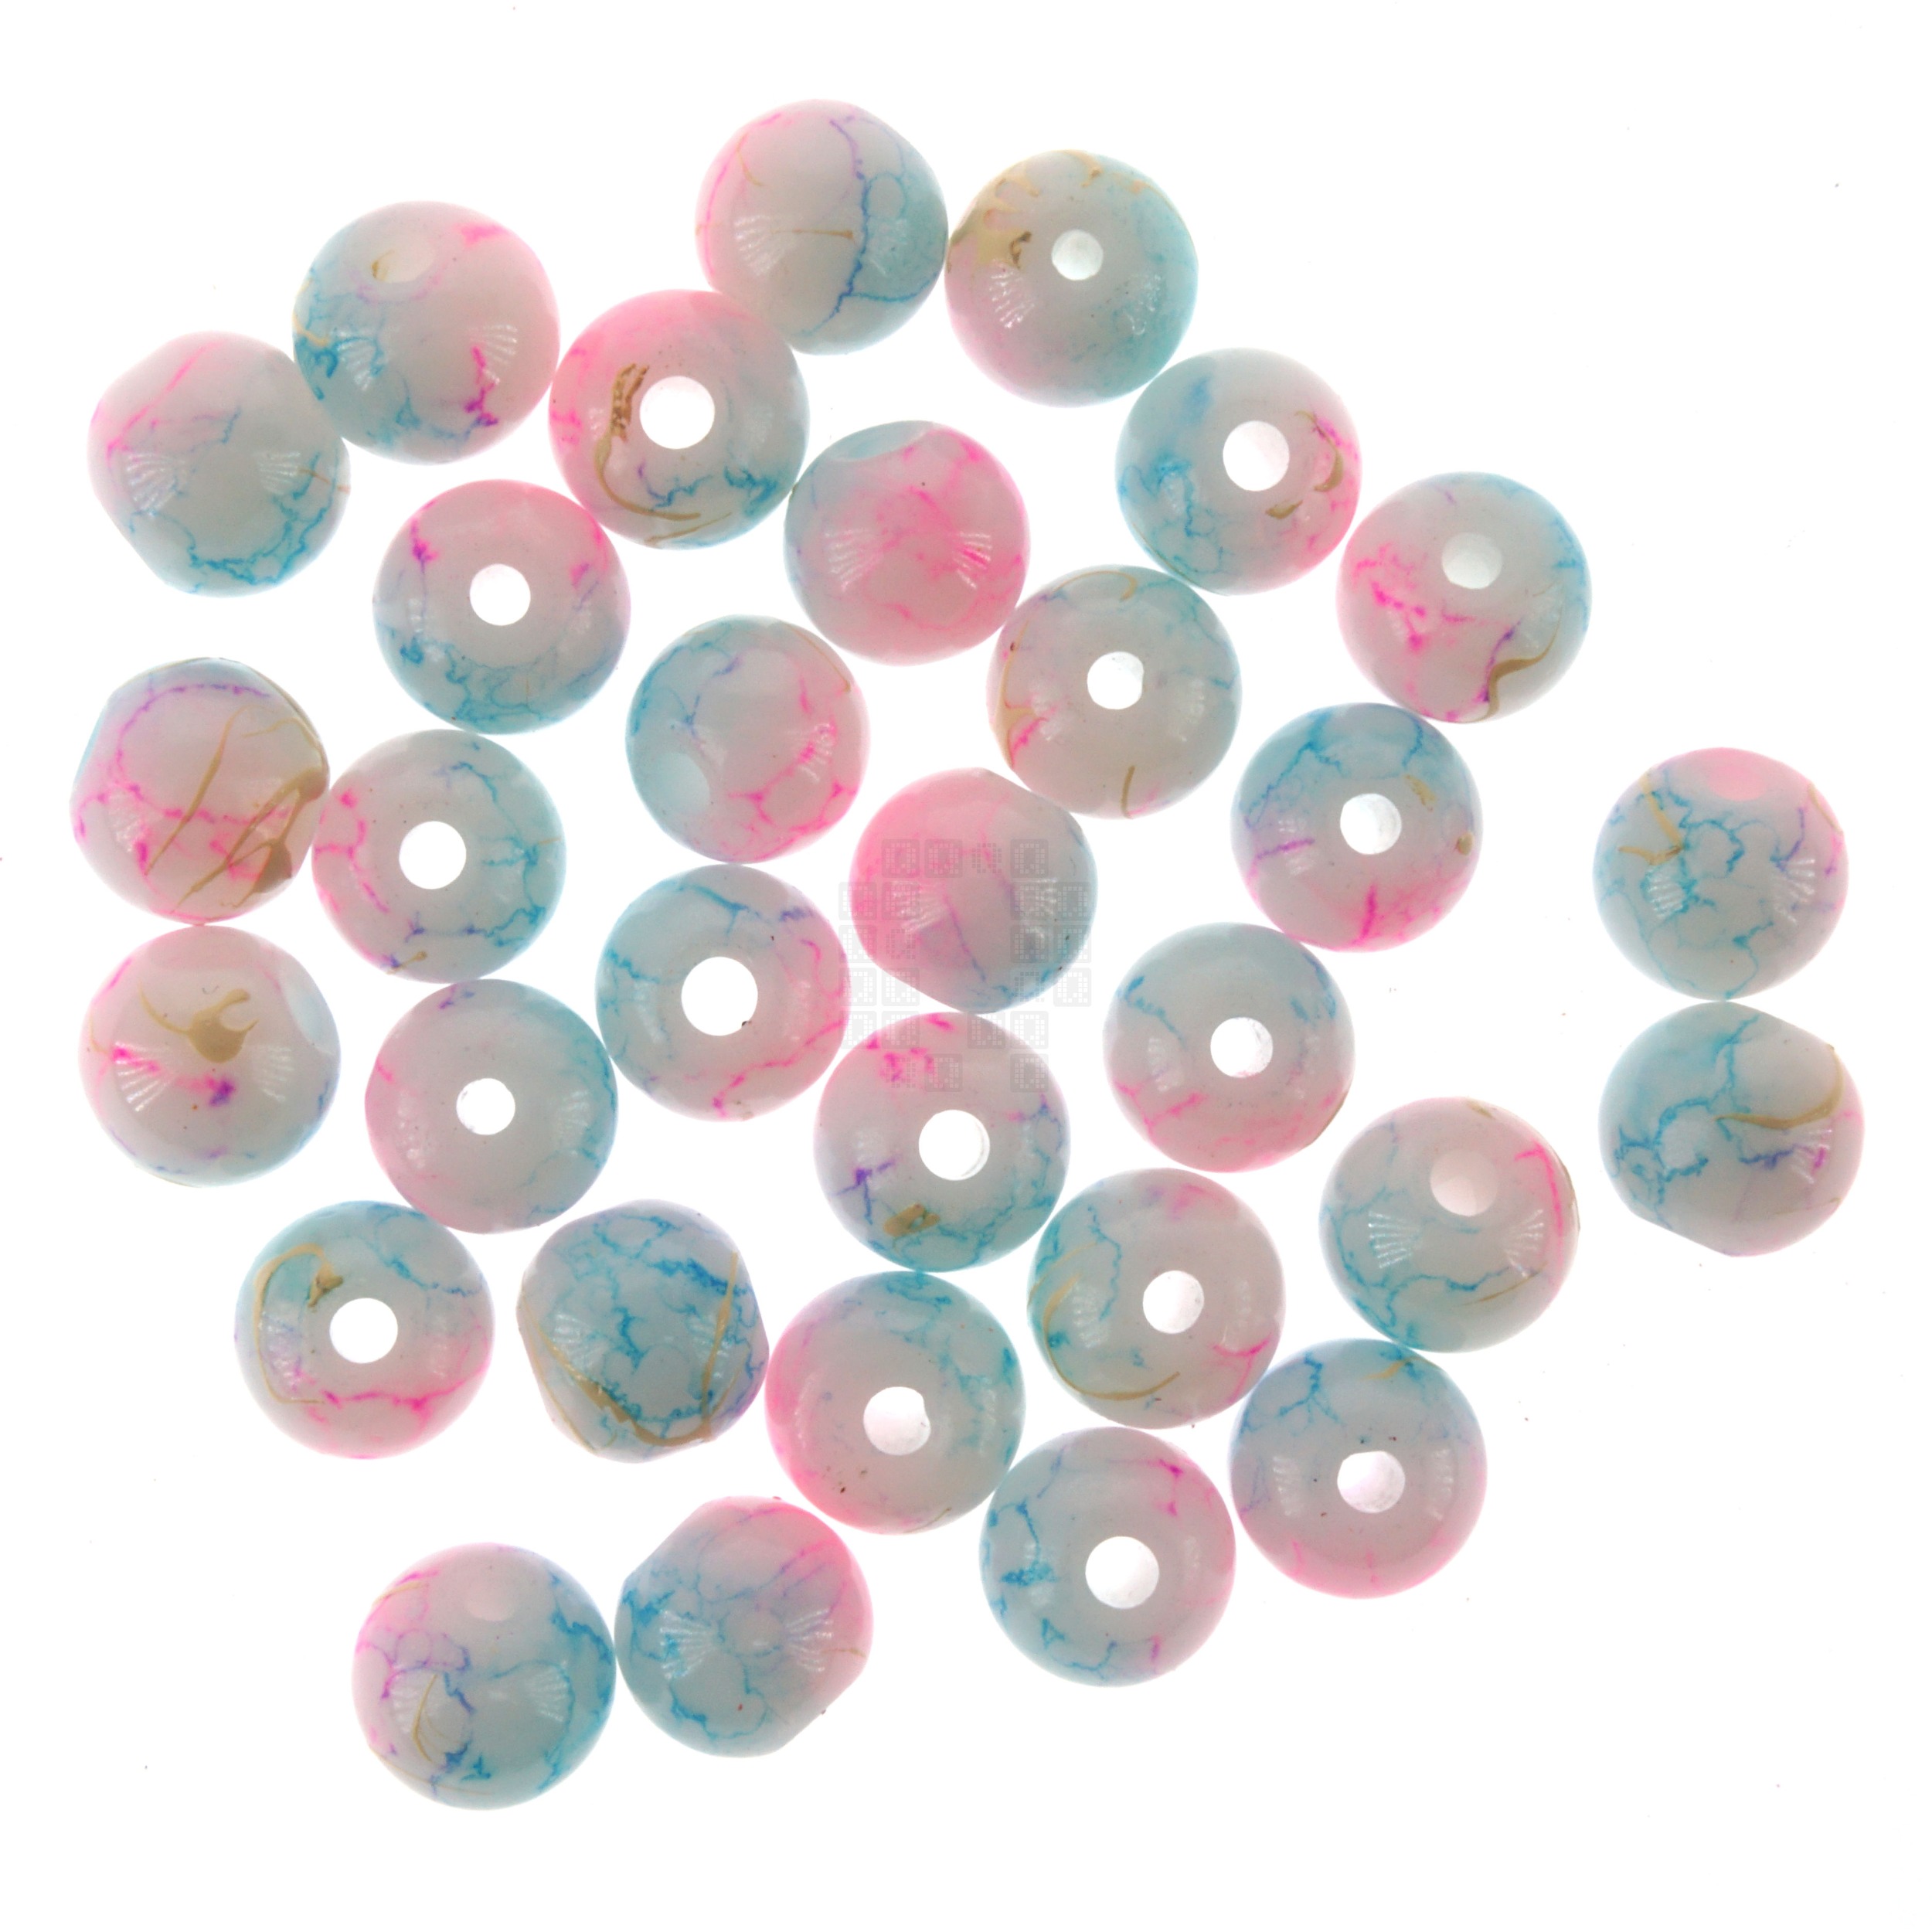 Cotton Candy 8mm Loose Glass Beads, 30 Pieces